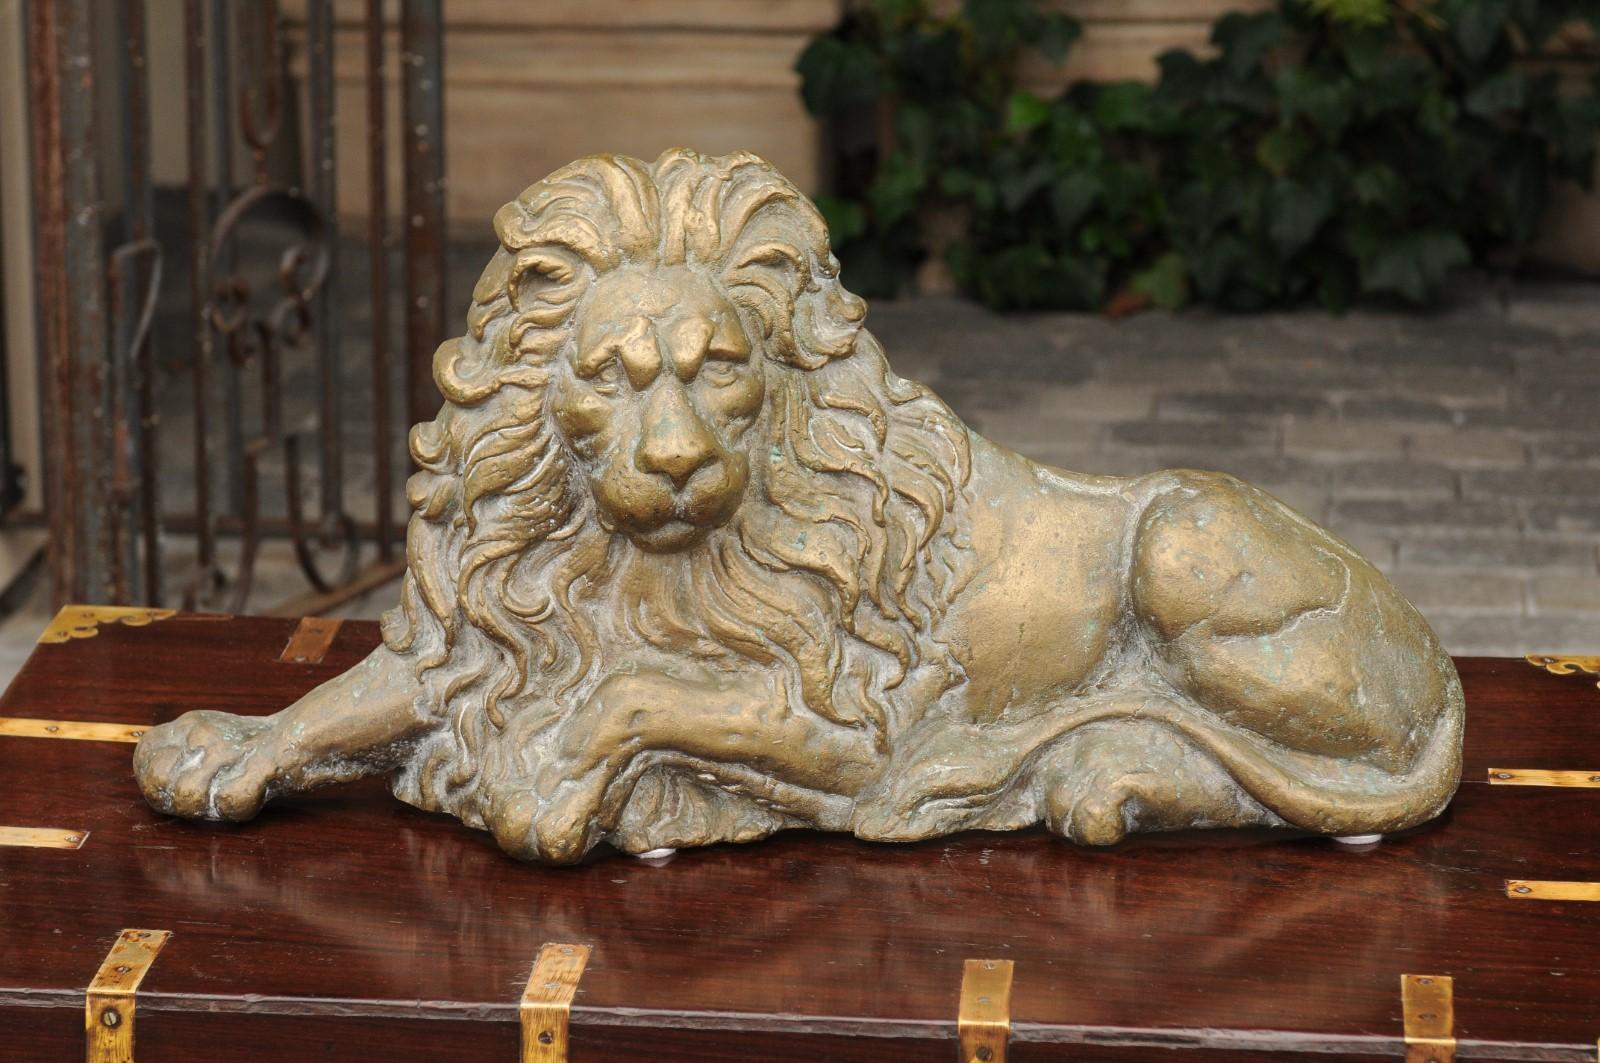 An English brass lion sculpture from the late 19th century, in a reclining position. Born in the later years of the 19th century, this English brass lion exudes an undeniable air of wisdom and strength. Looking directly at us, he is communicating